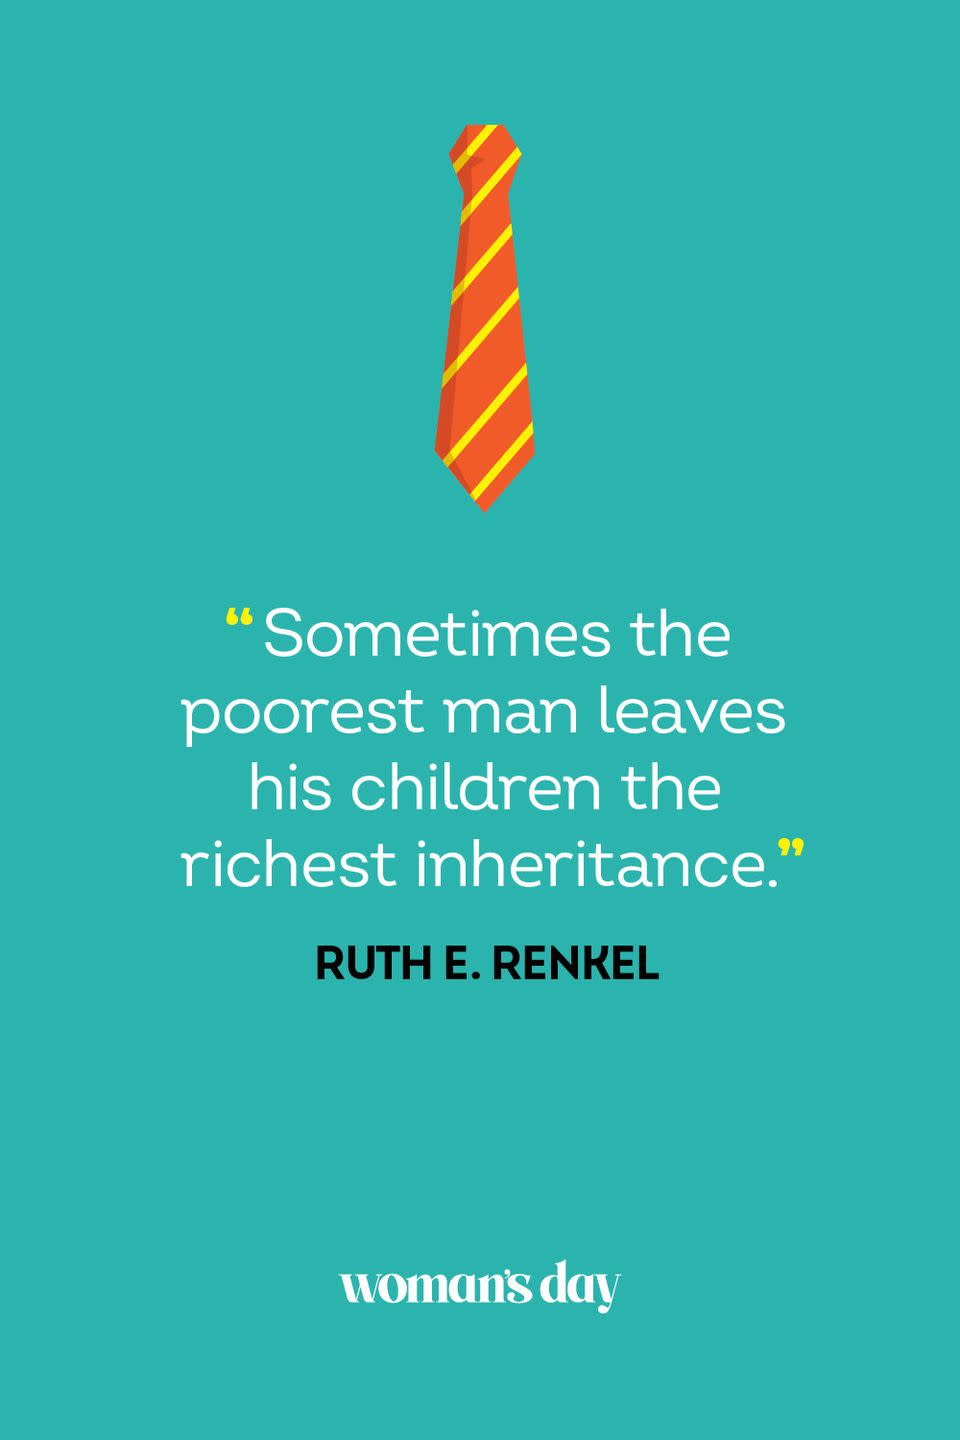 fathers day quotes ruth e renkel